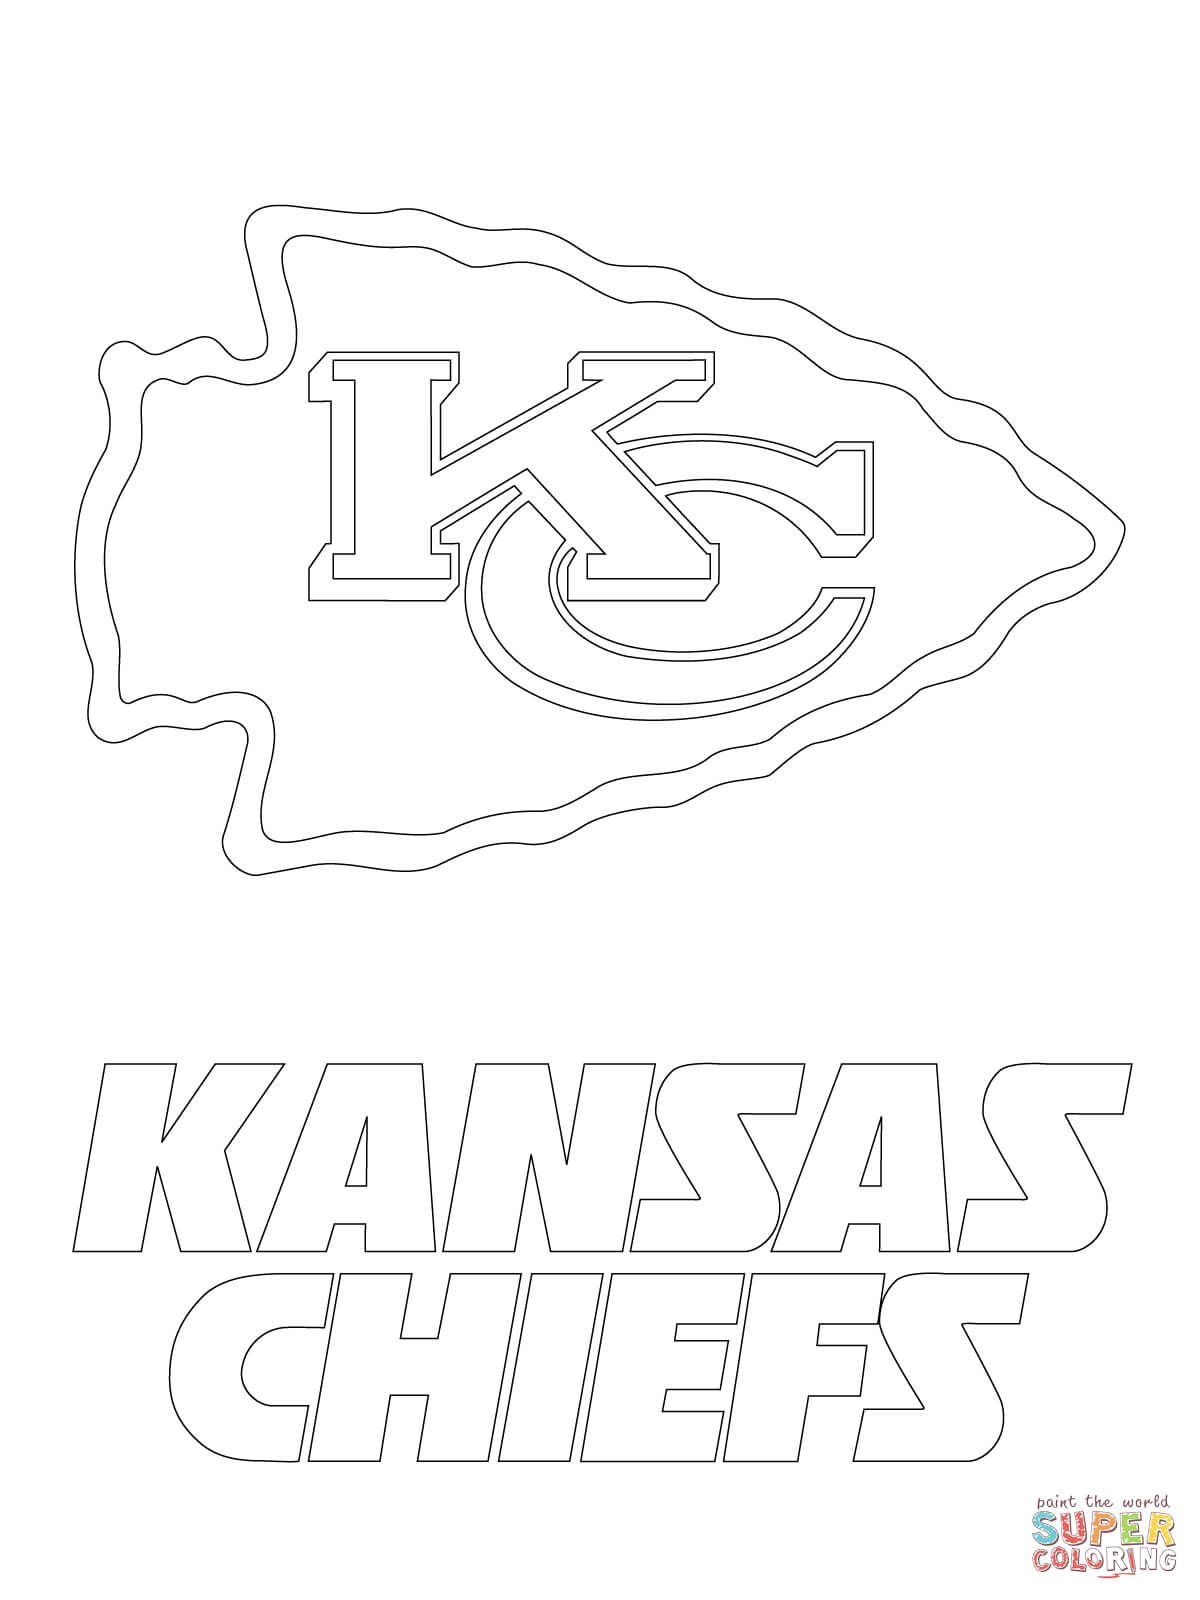 Kansas City Chiefs Logo coloring page | Free Printable Coloring Pages